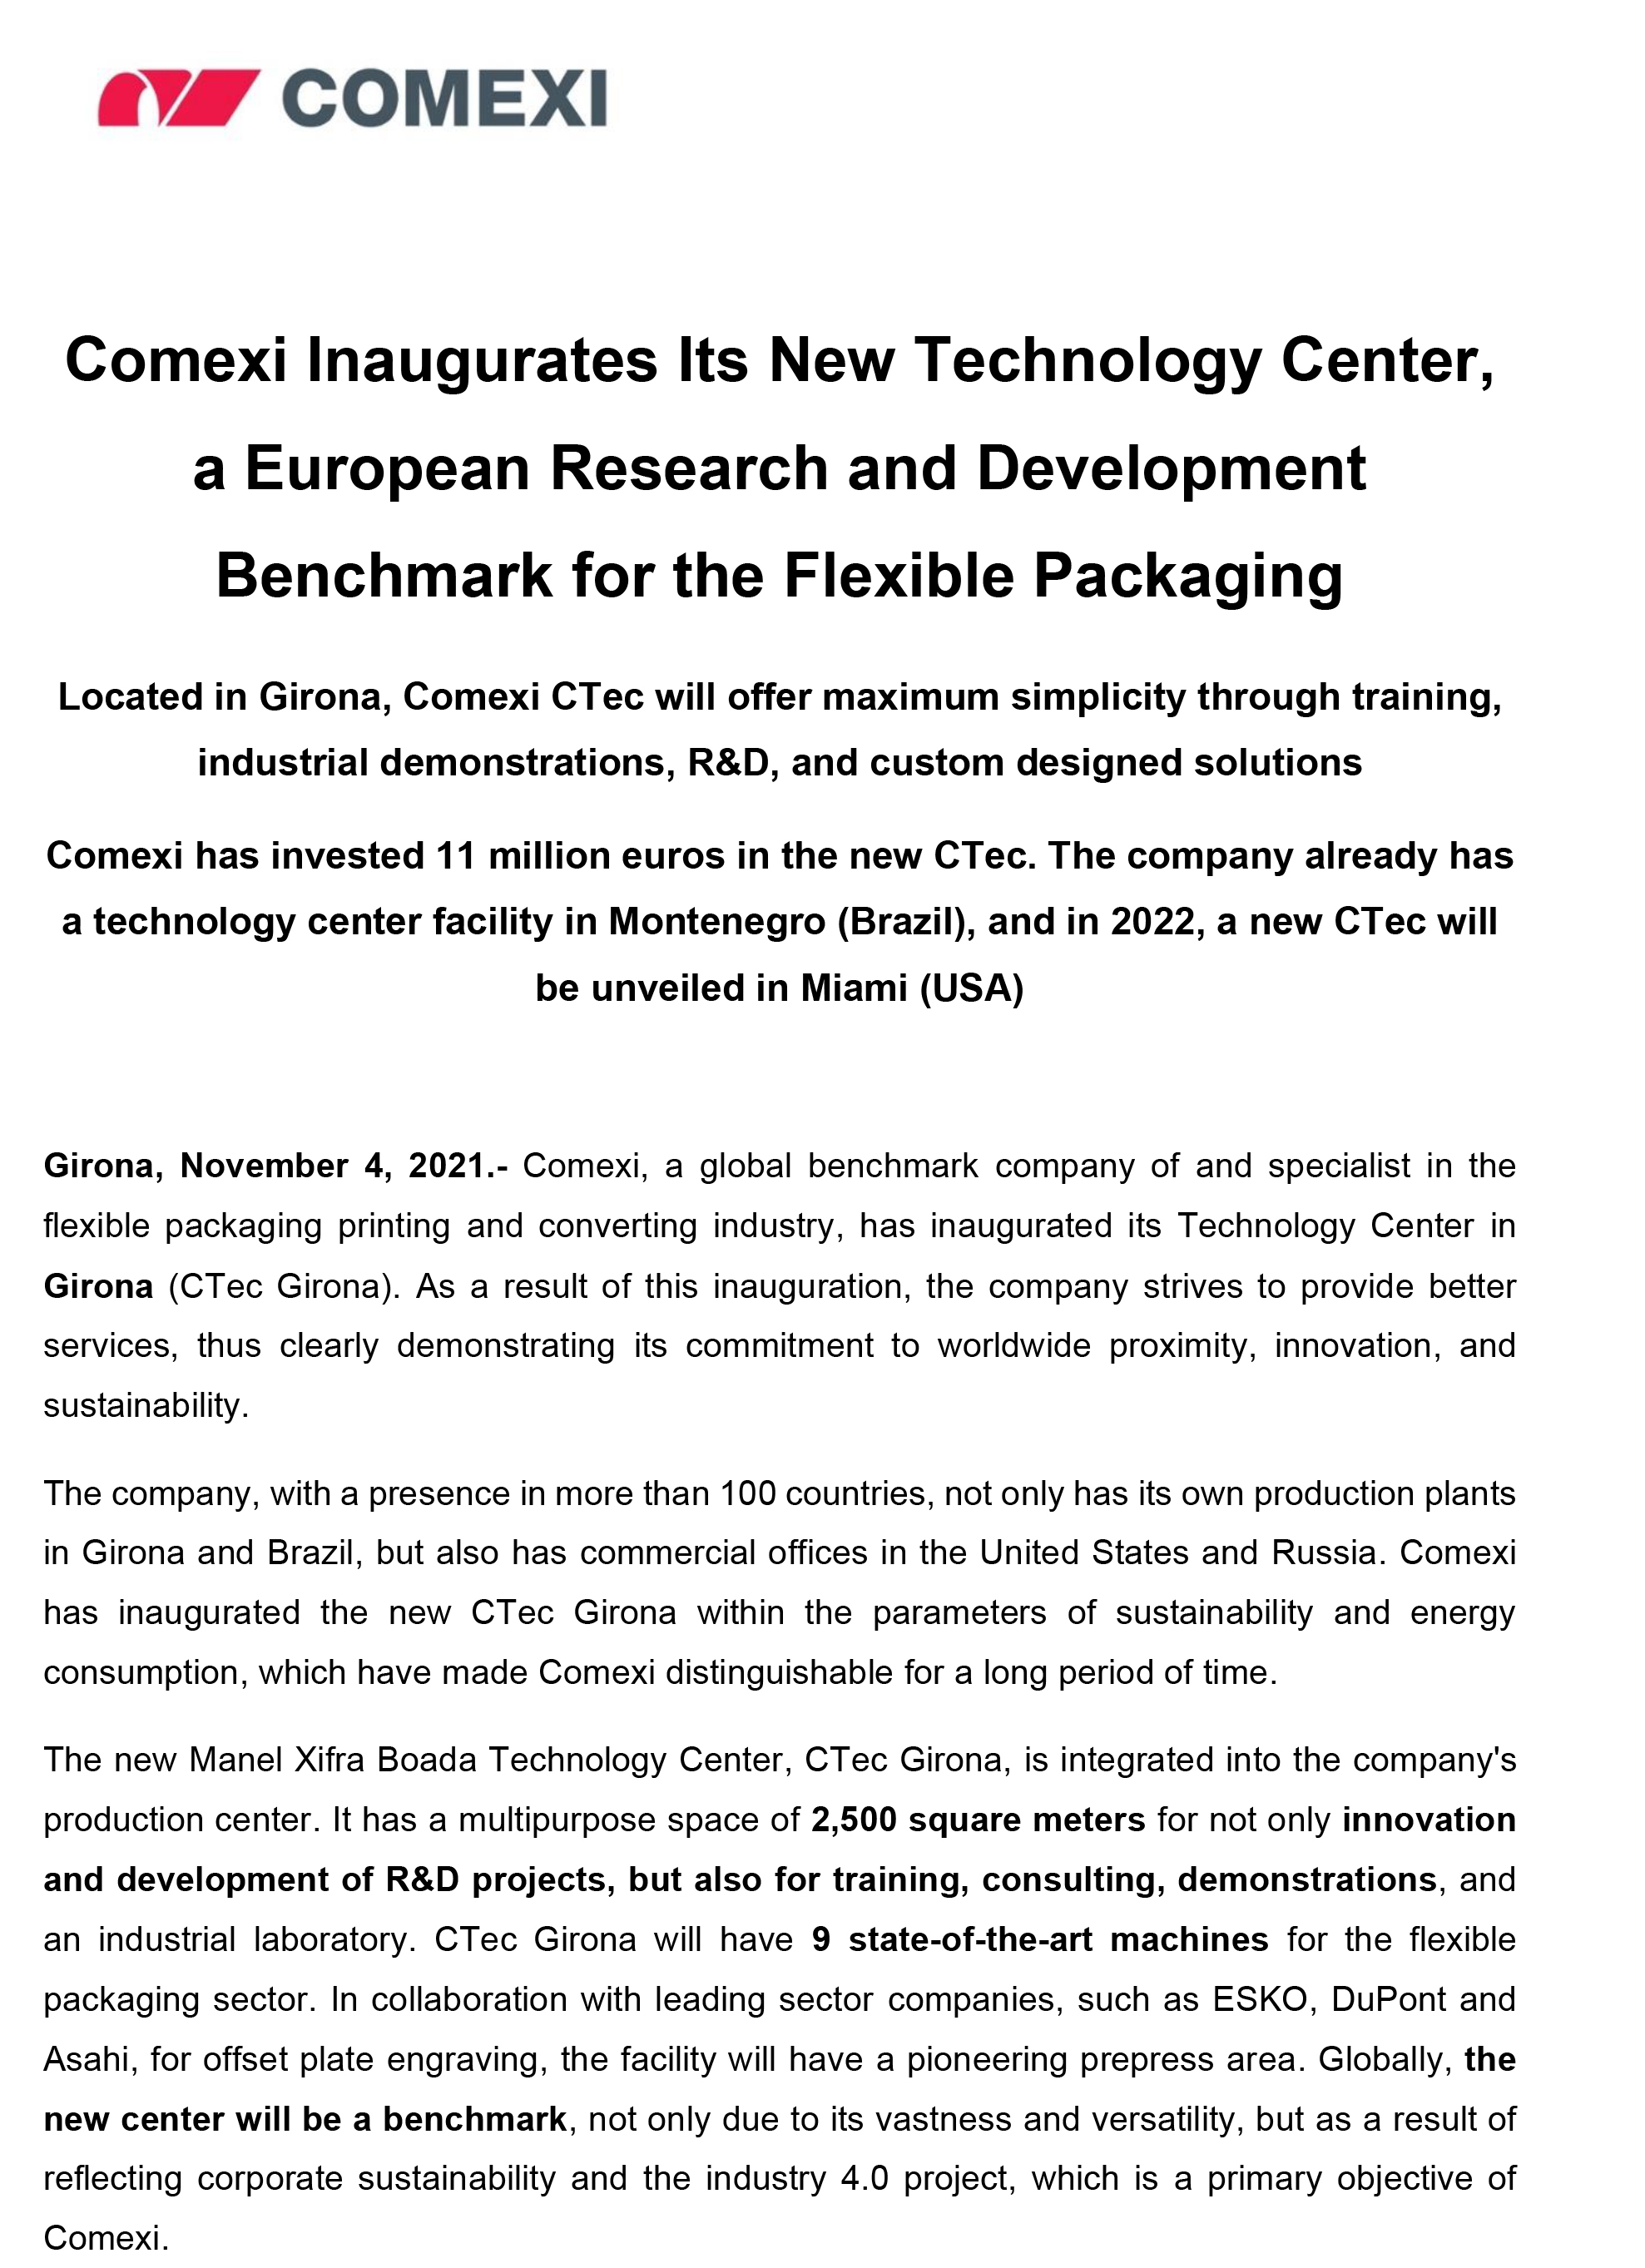 Comexi Inaugurates Its New Technology Center, a European Research and Development Benchmark for the Flexible Packaging